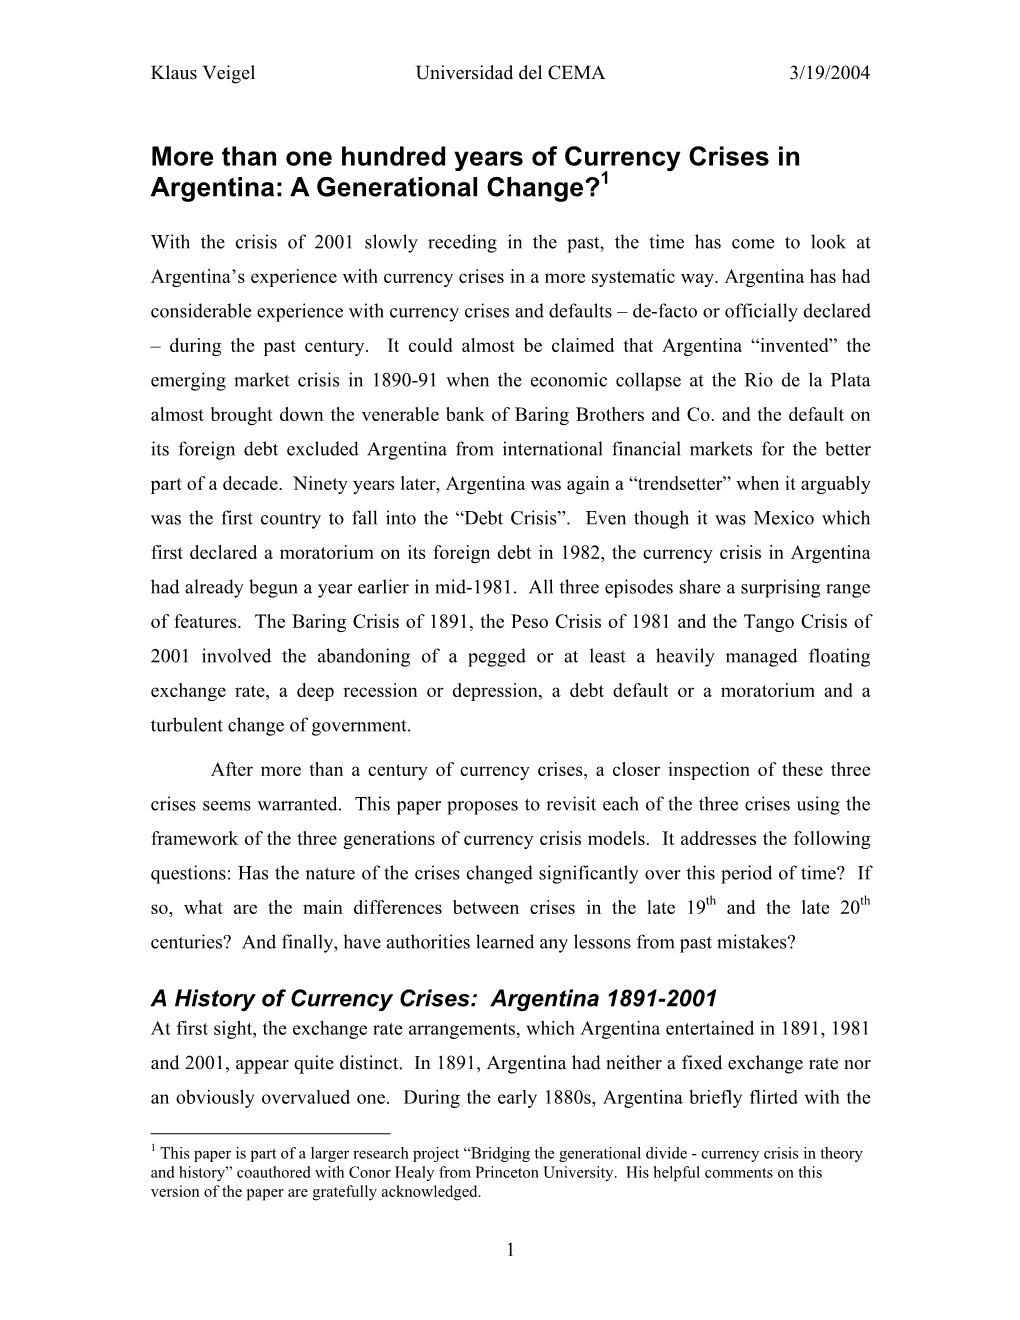 Than One Hundred Years of Currency Crises in Argentina: a Generational Change?1